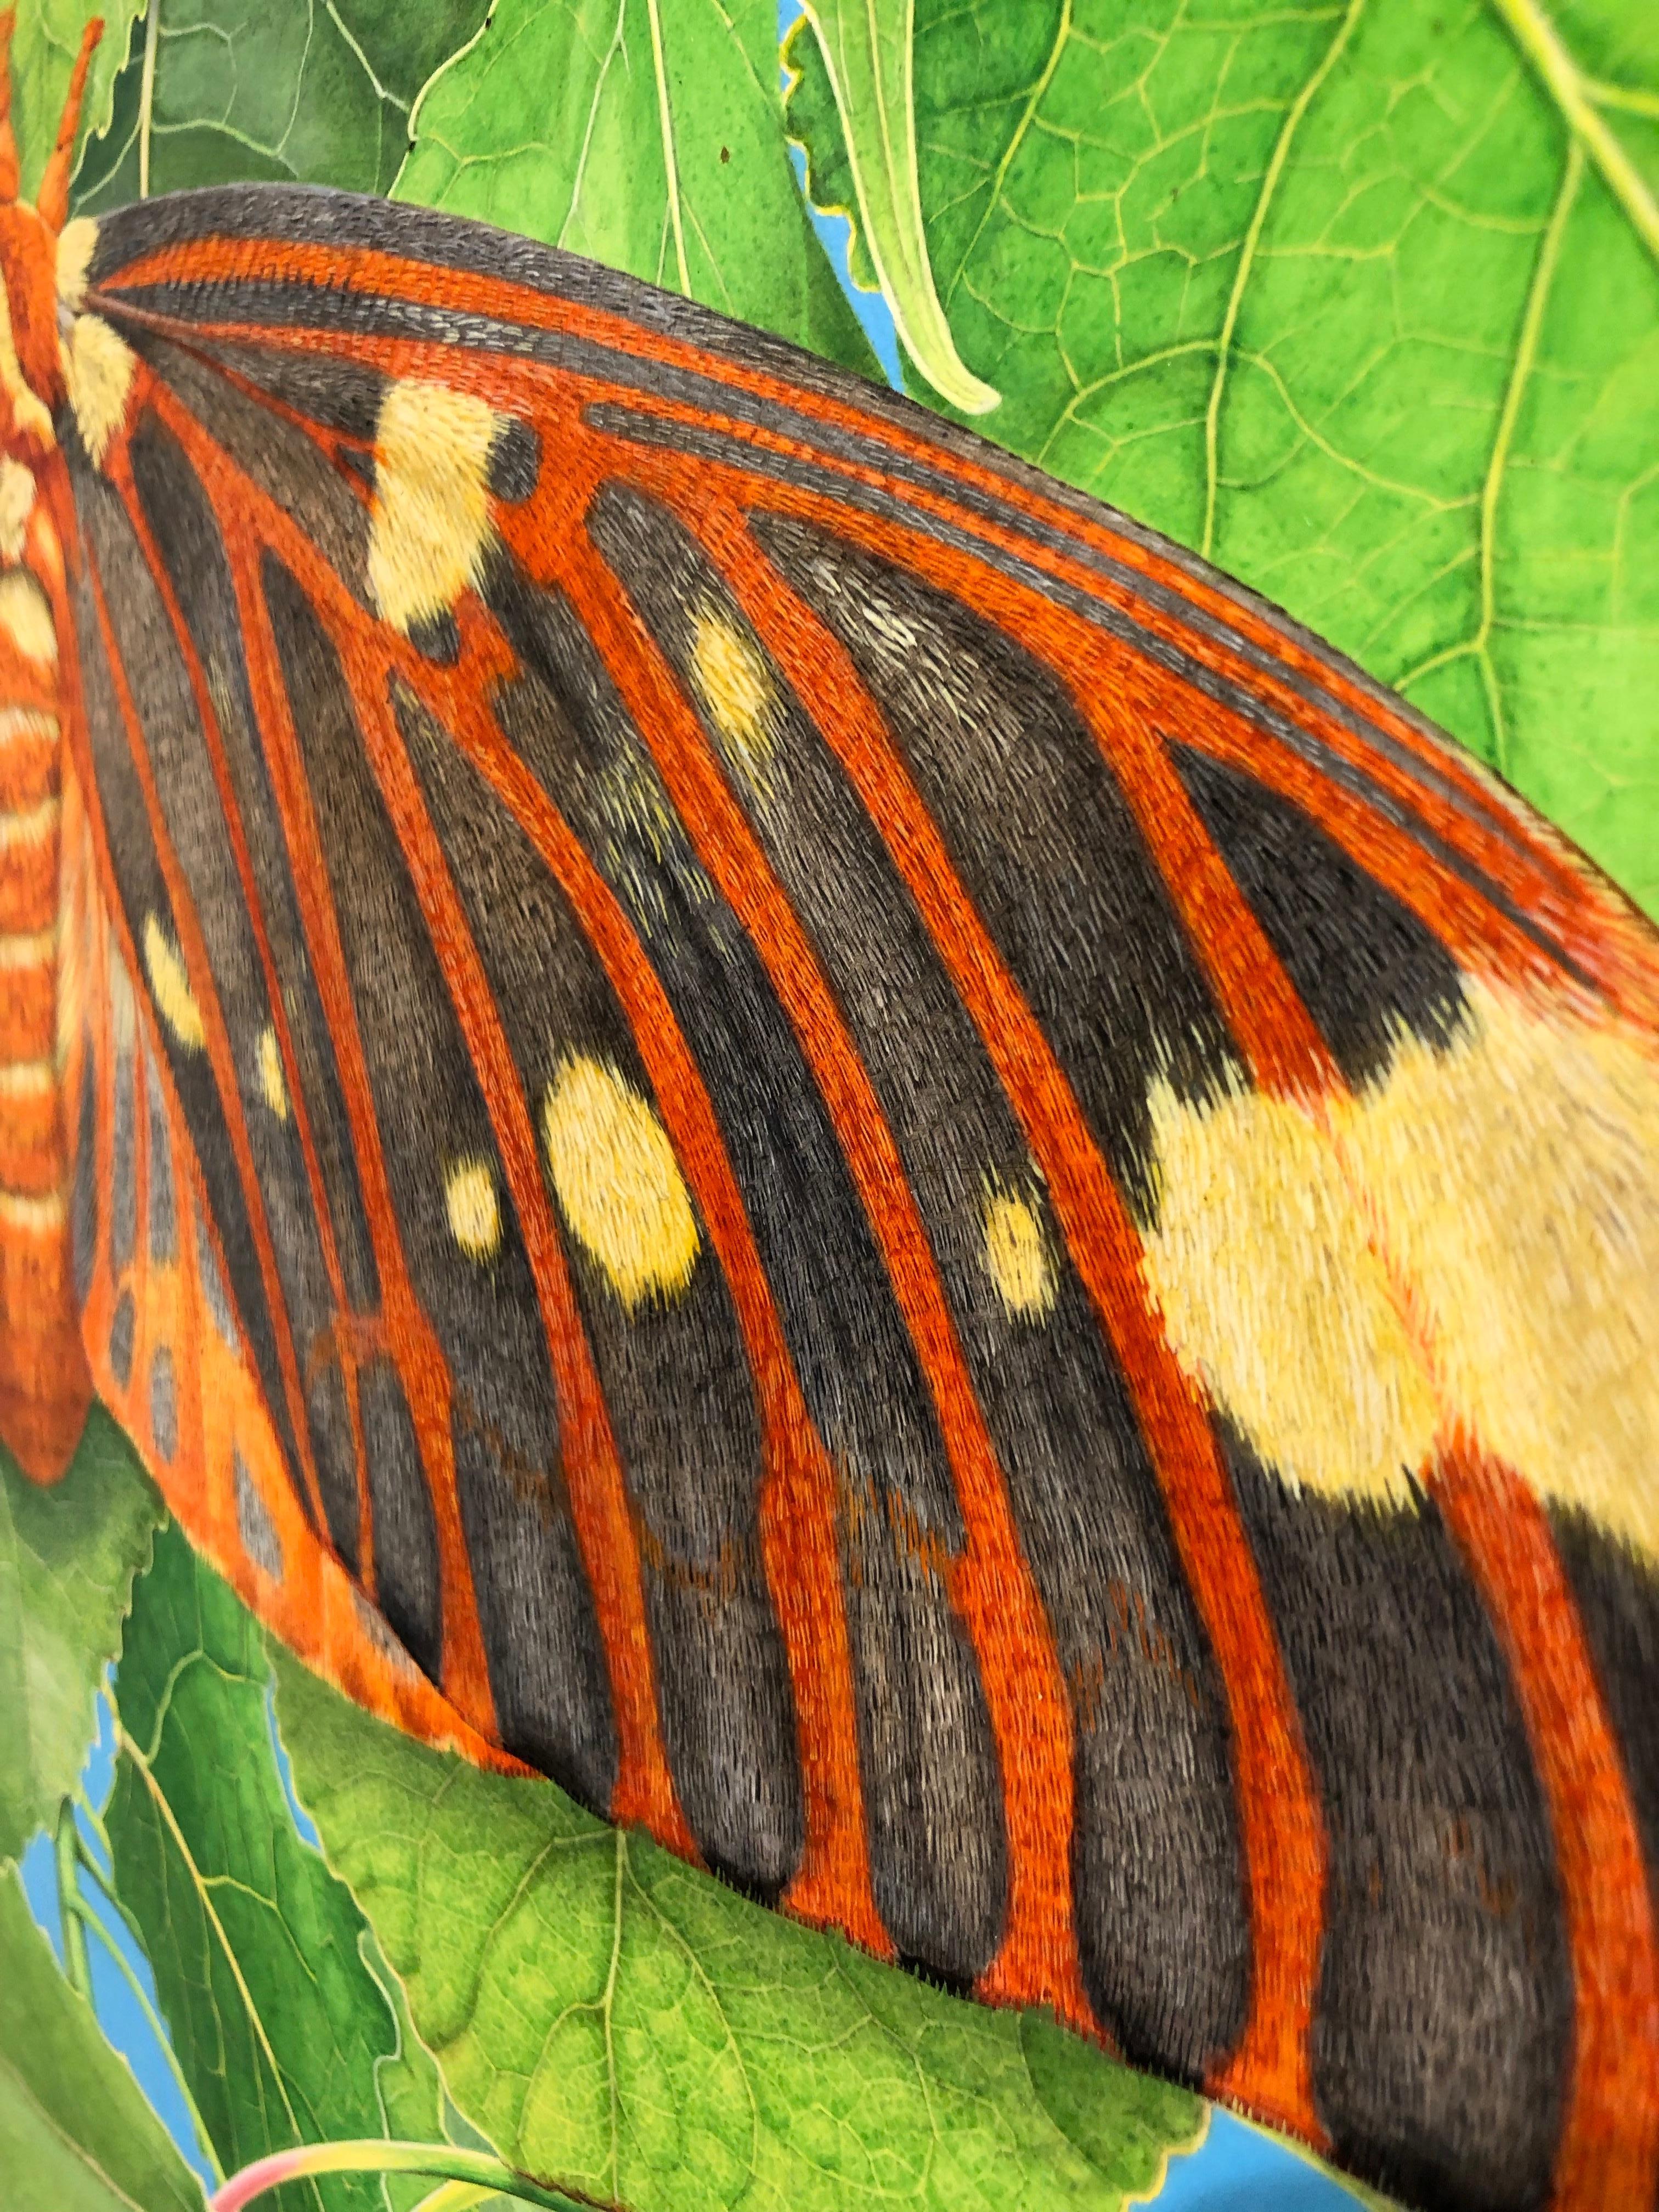 Regal Moth and Aspen - Highly Detailed Photorealist Close-Up Nature Painting  3